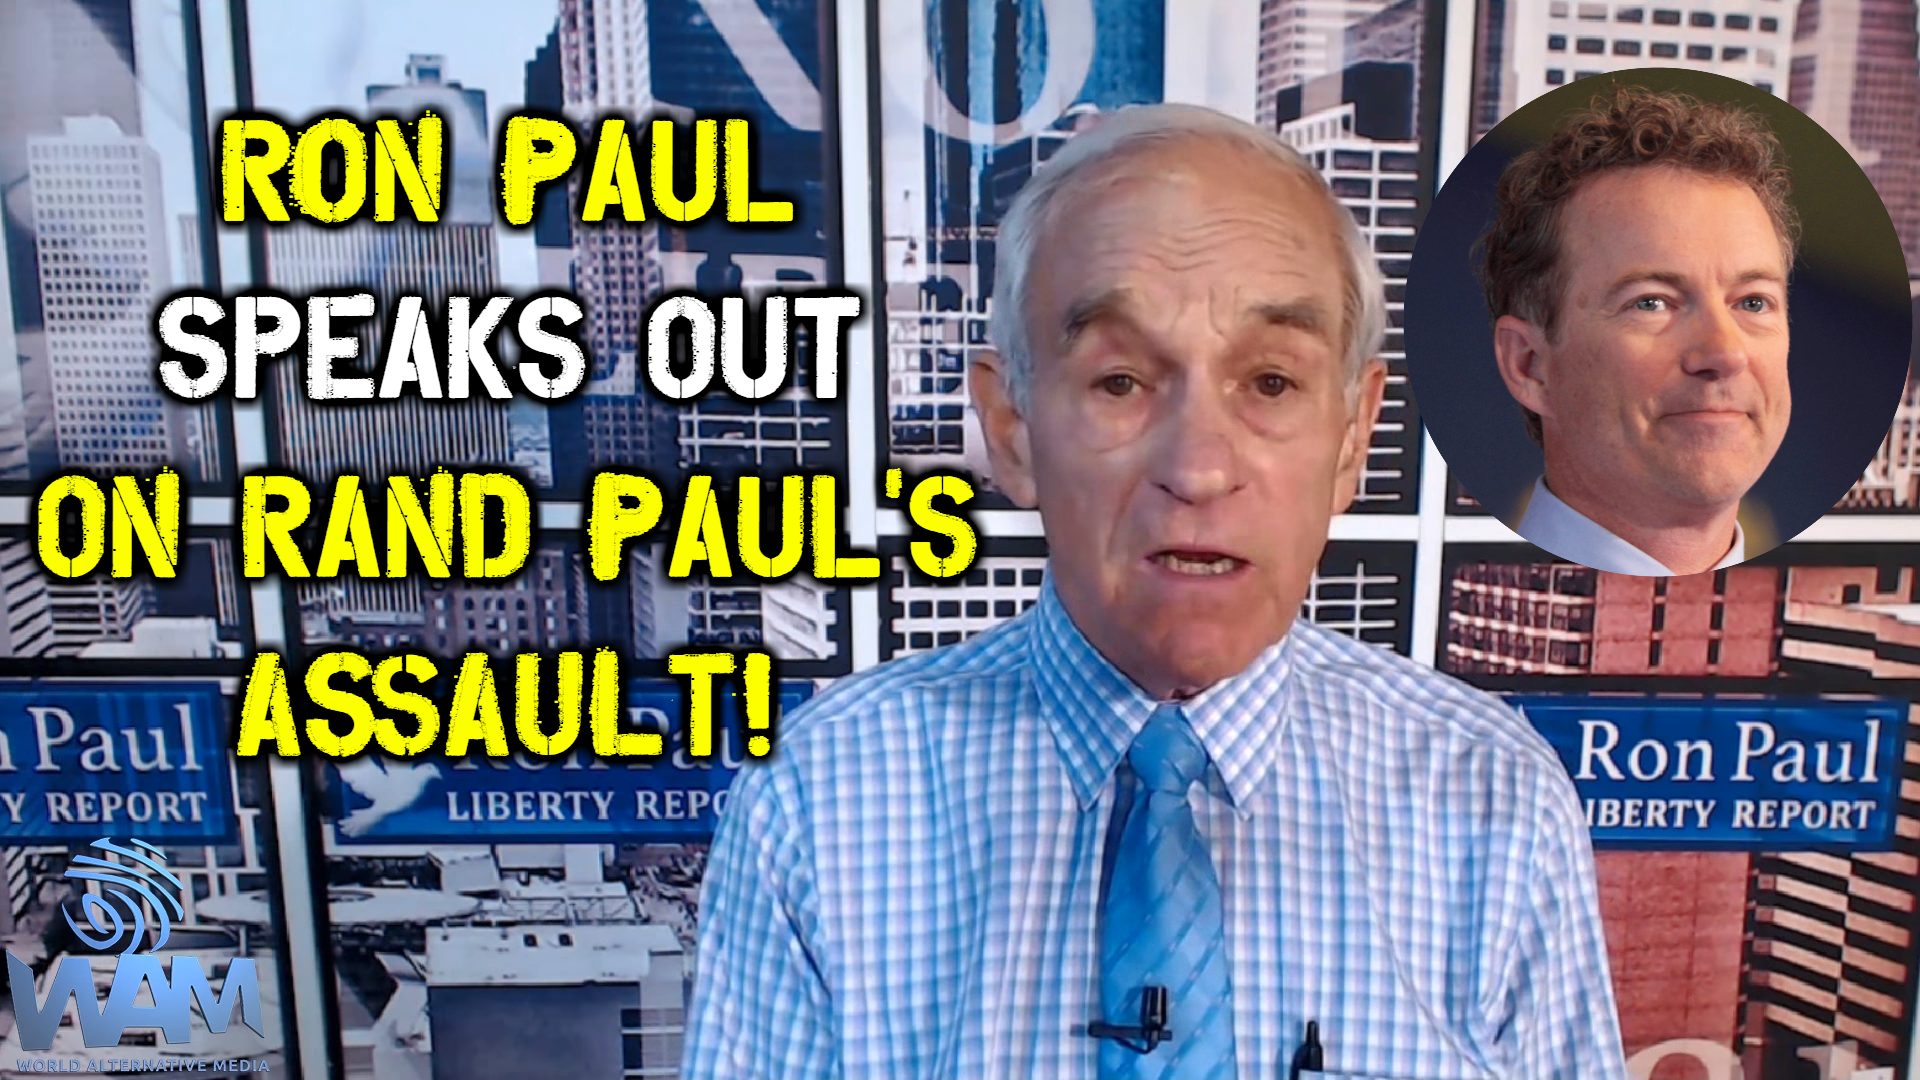 ron paul speaks out on rand pauls assault.png